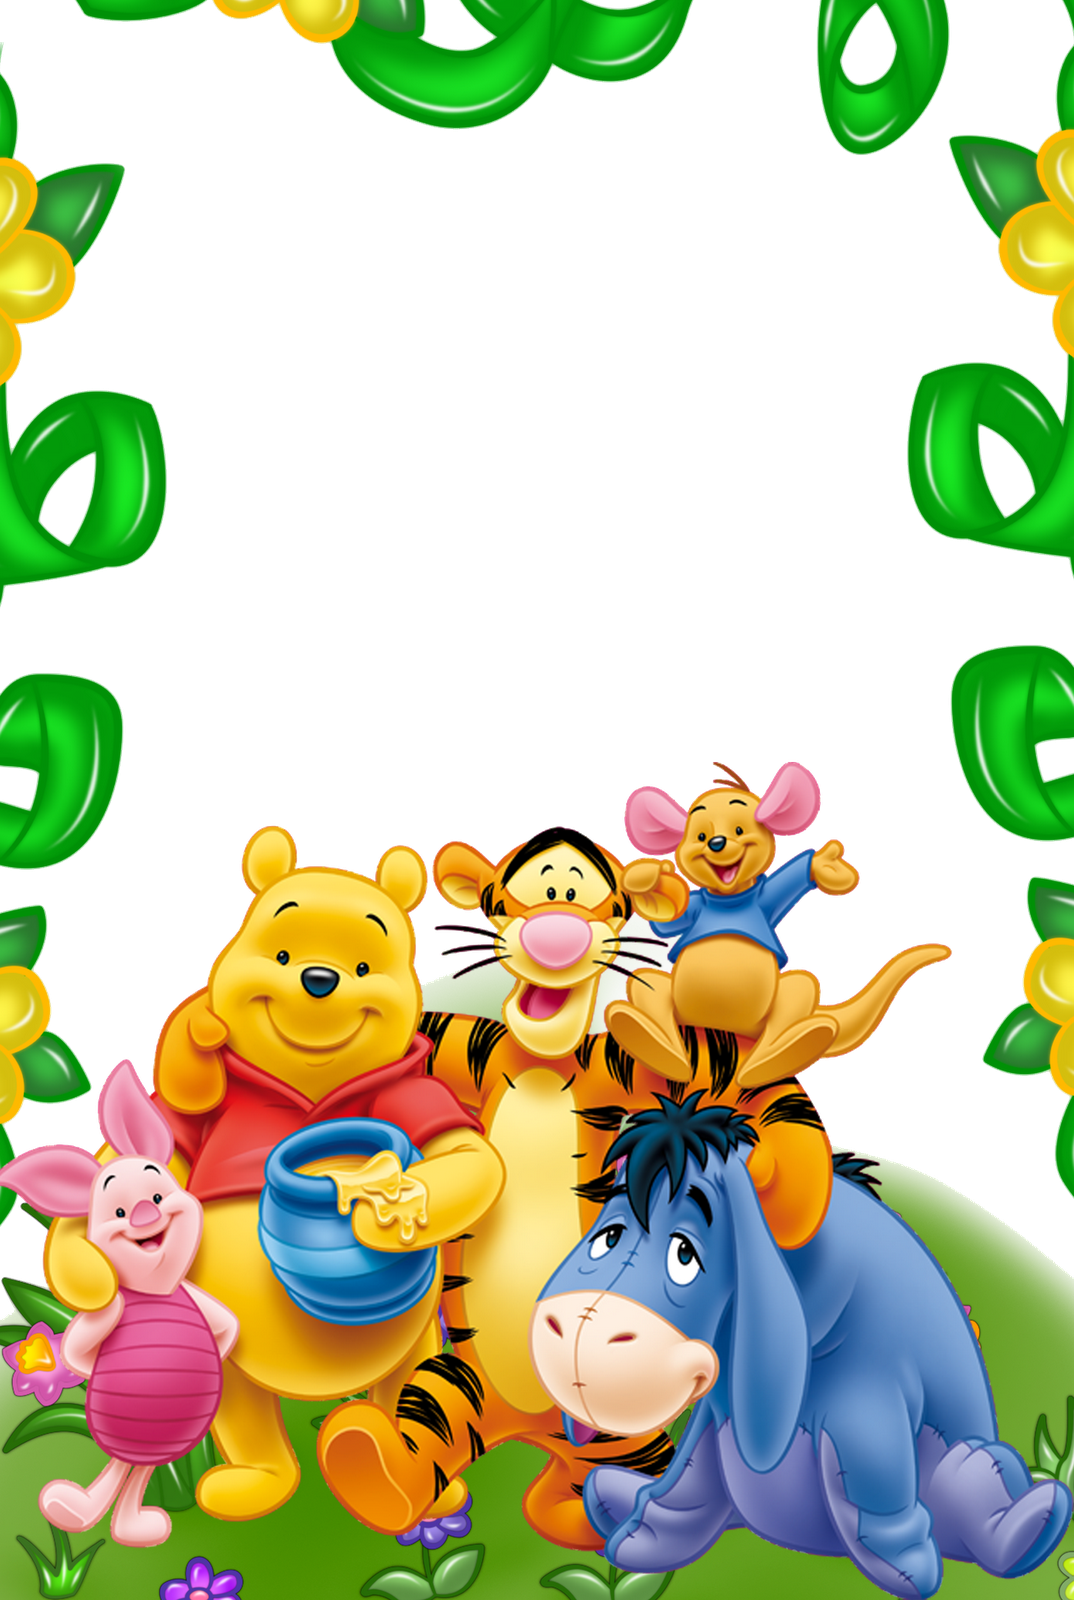 Winnie the Pooh and Friends Kids Transparent Frame